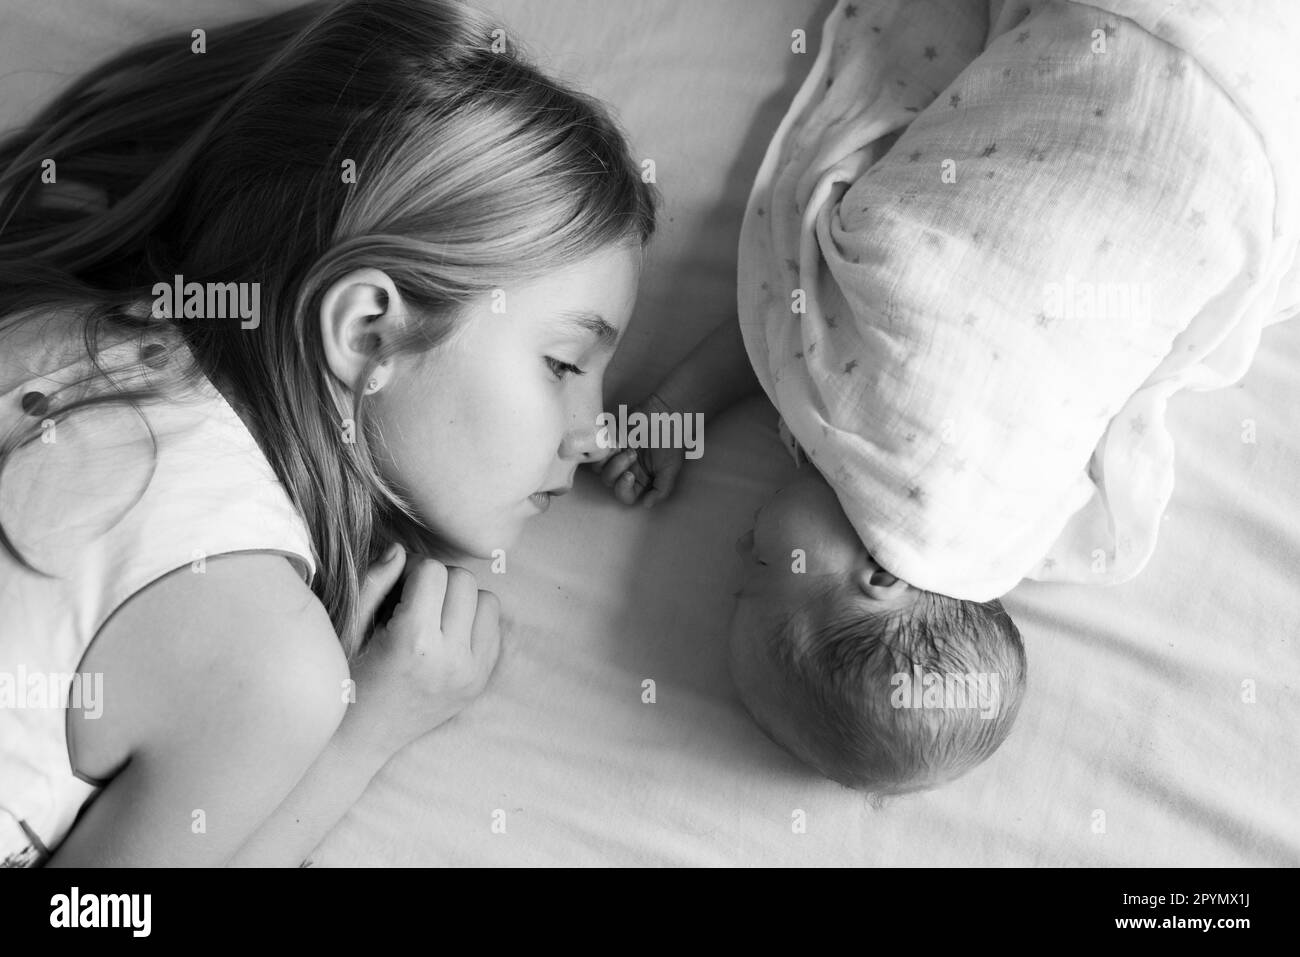 A sister playing and bonding with her baby sibling during nappy changing time on a baby changing table Stock Photo